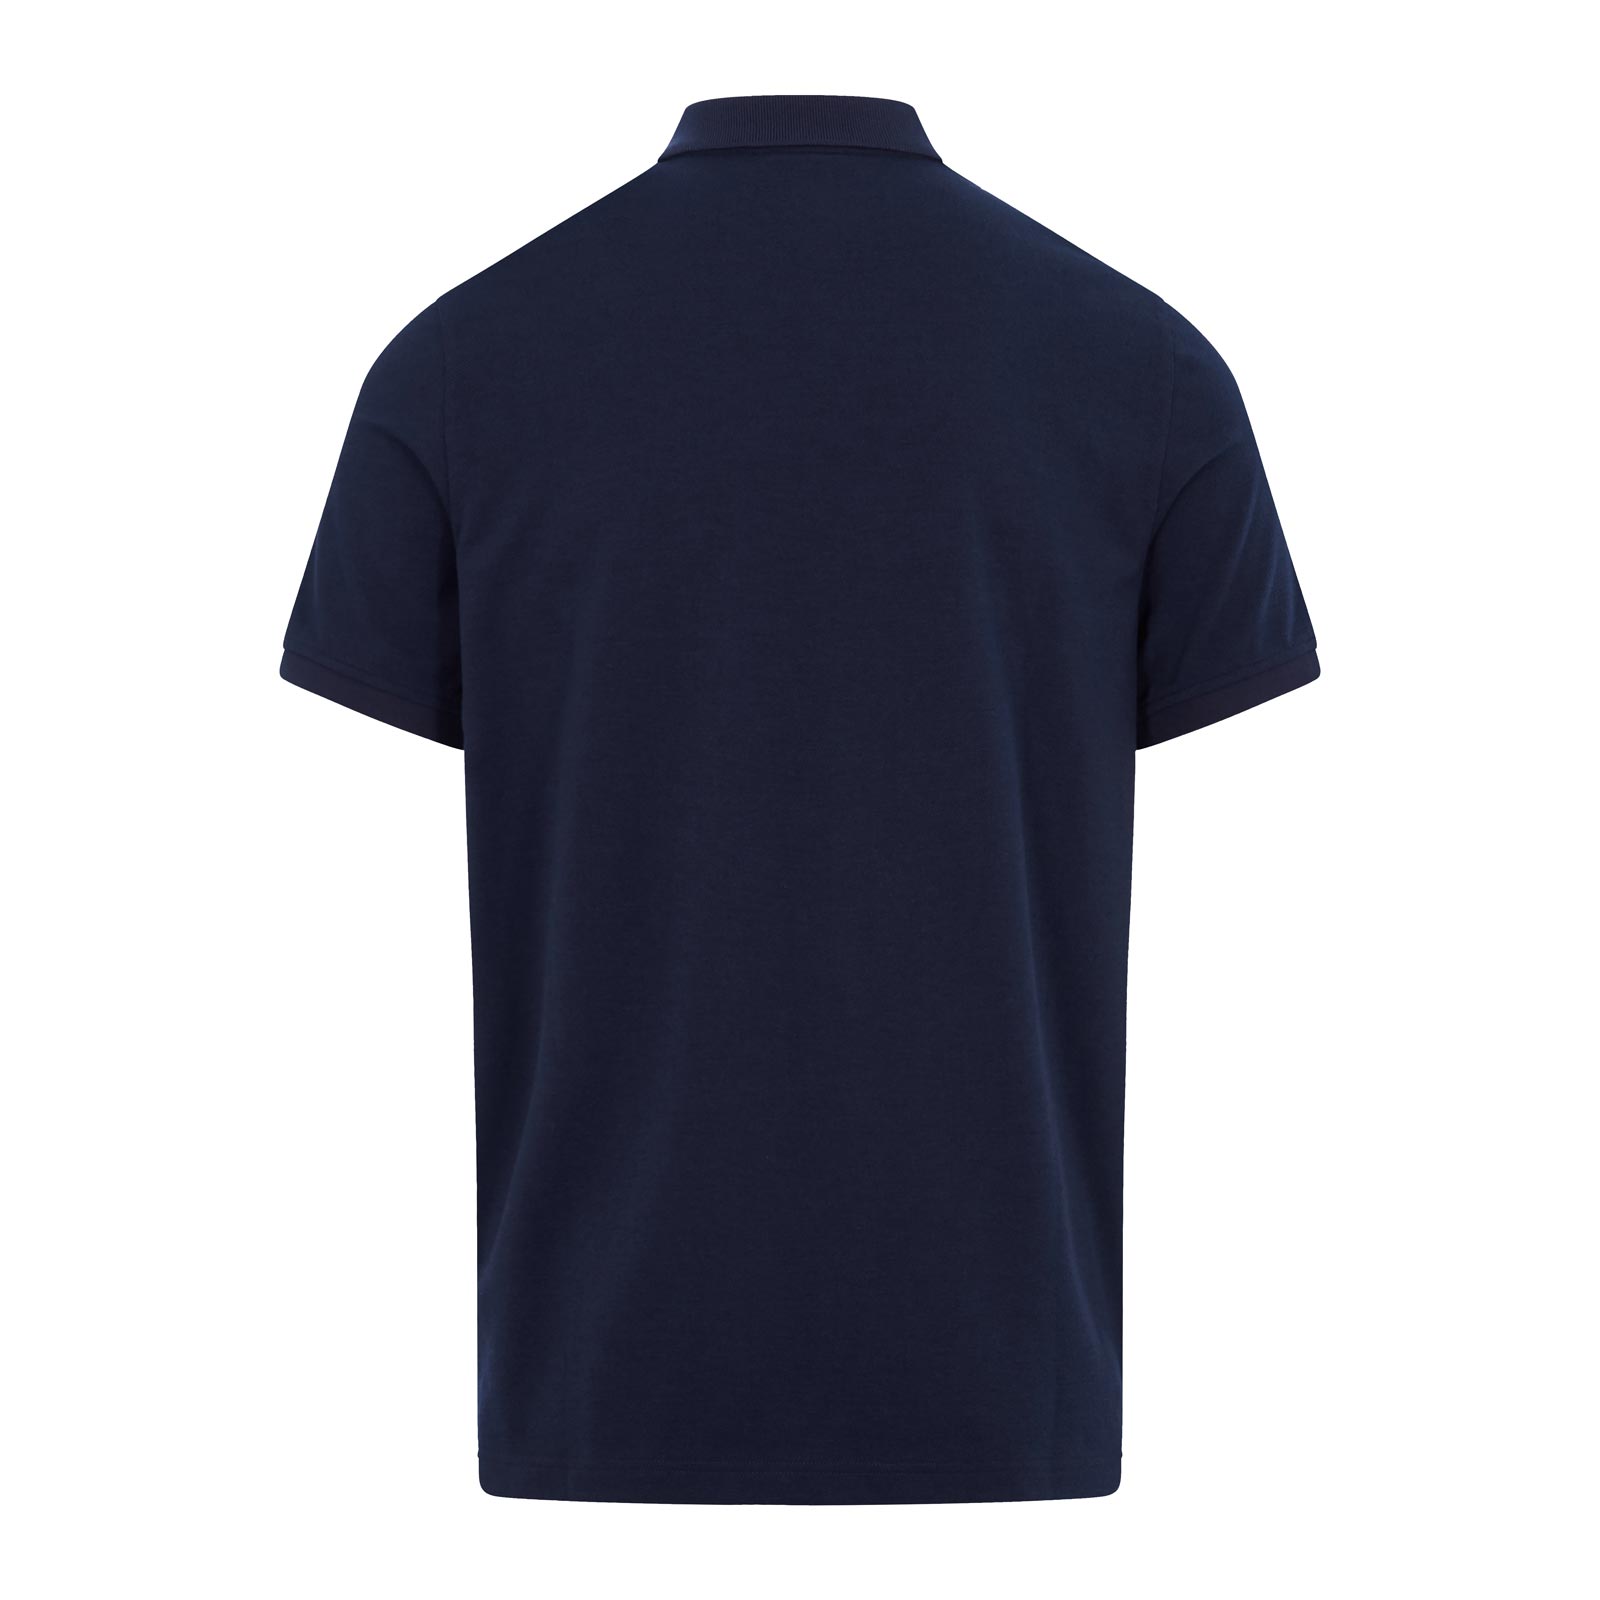 B. Canterbury Ireland Rugby IRFU 2022 Team Navy Polo Shirt OUT OF STOCK ...